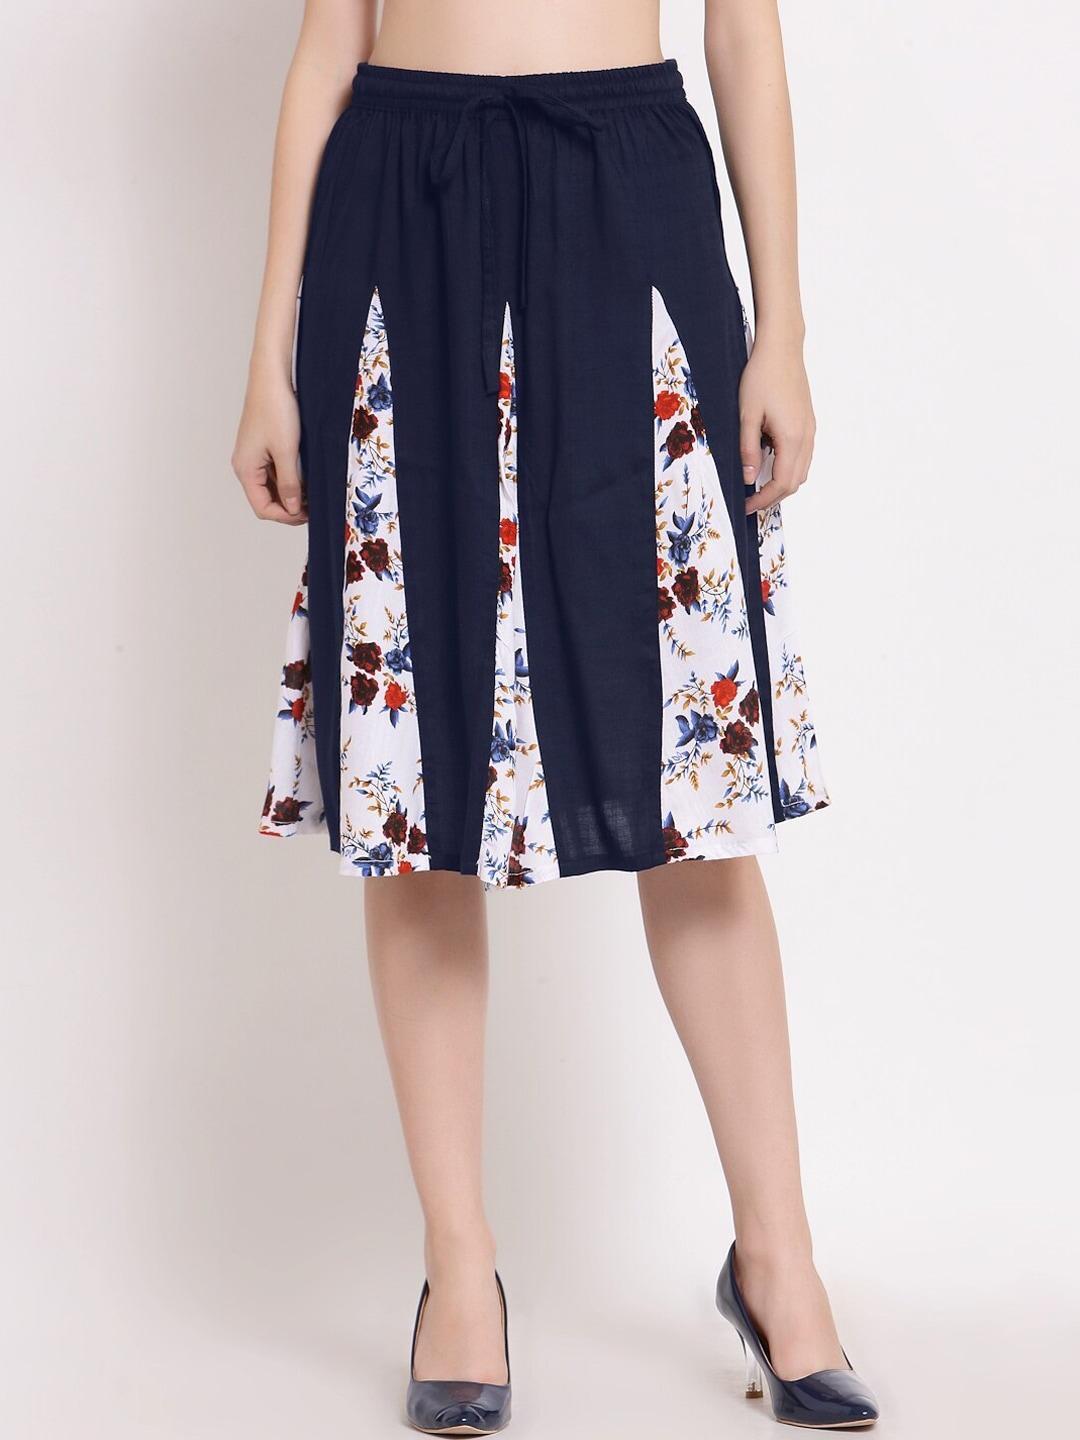 patrorna women navy blue & white printed flared skirt with contrast pleated detailing